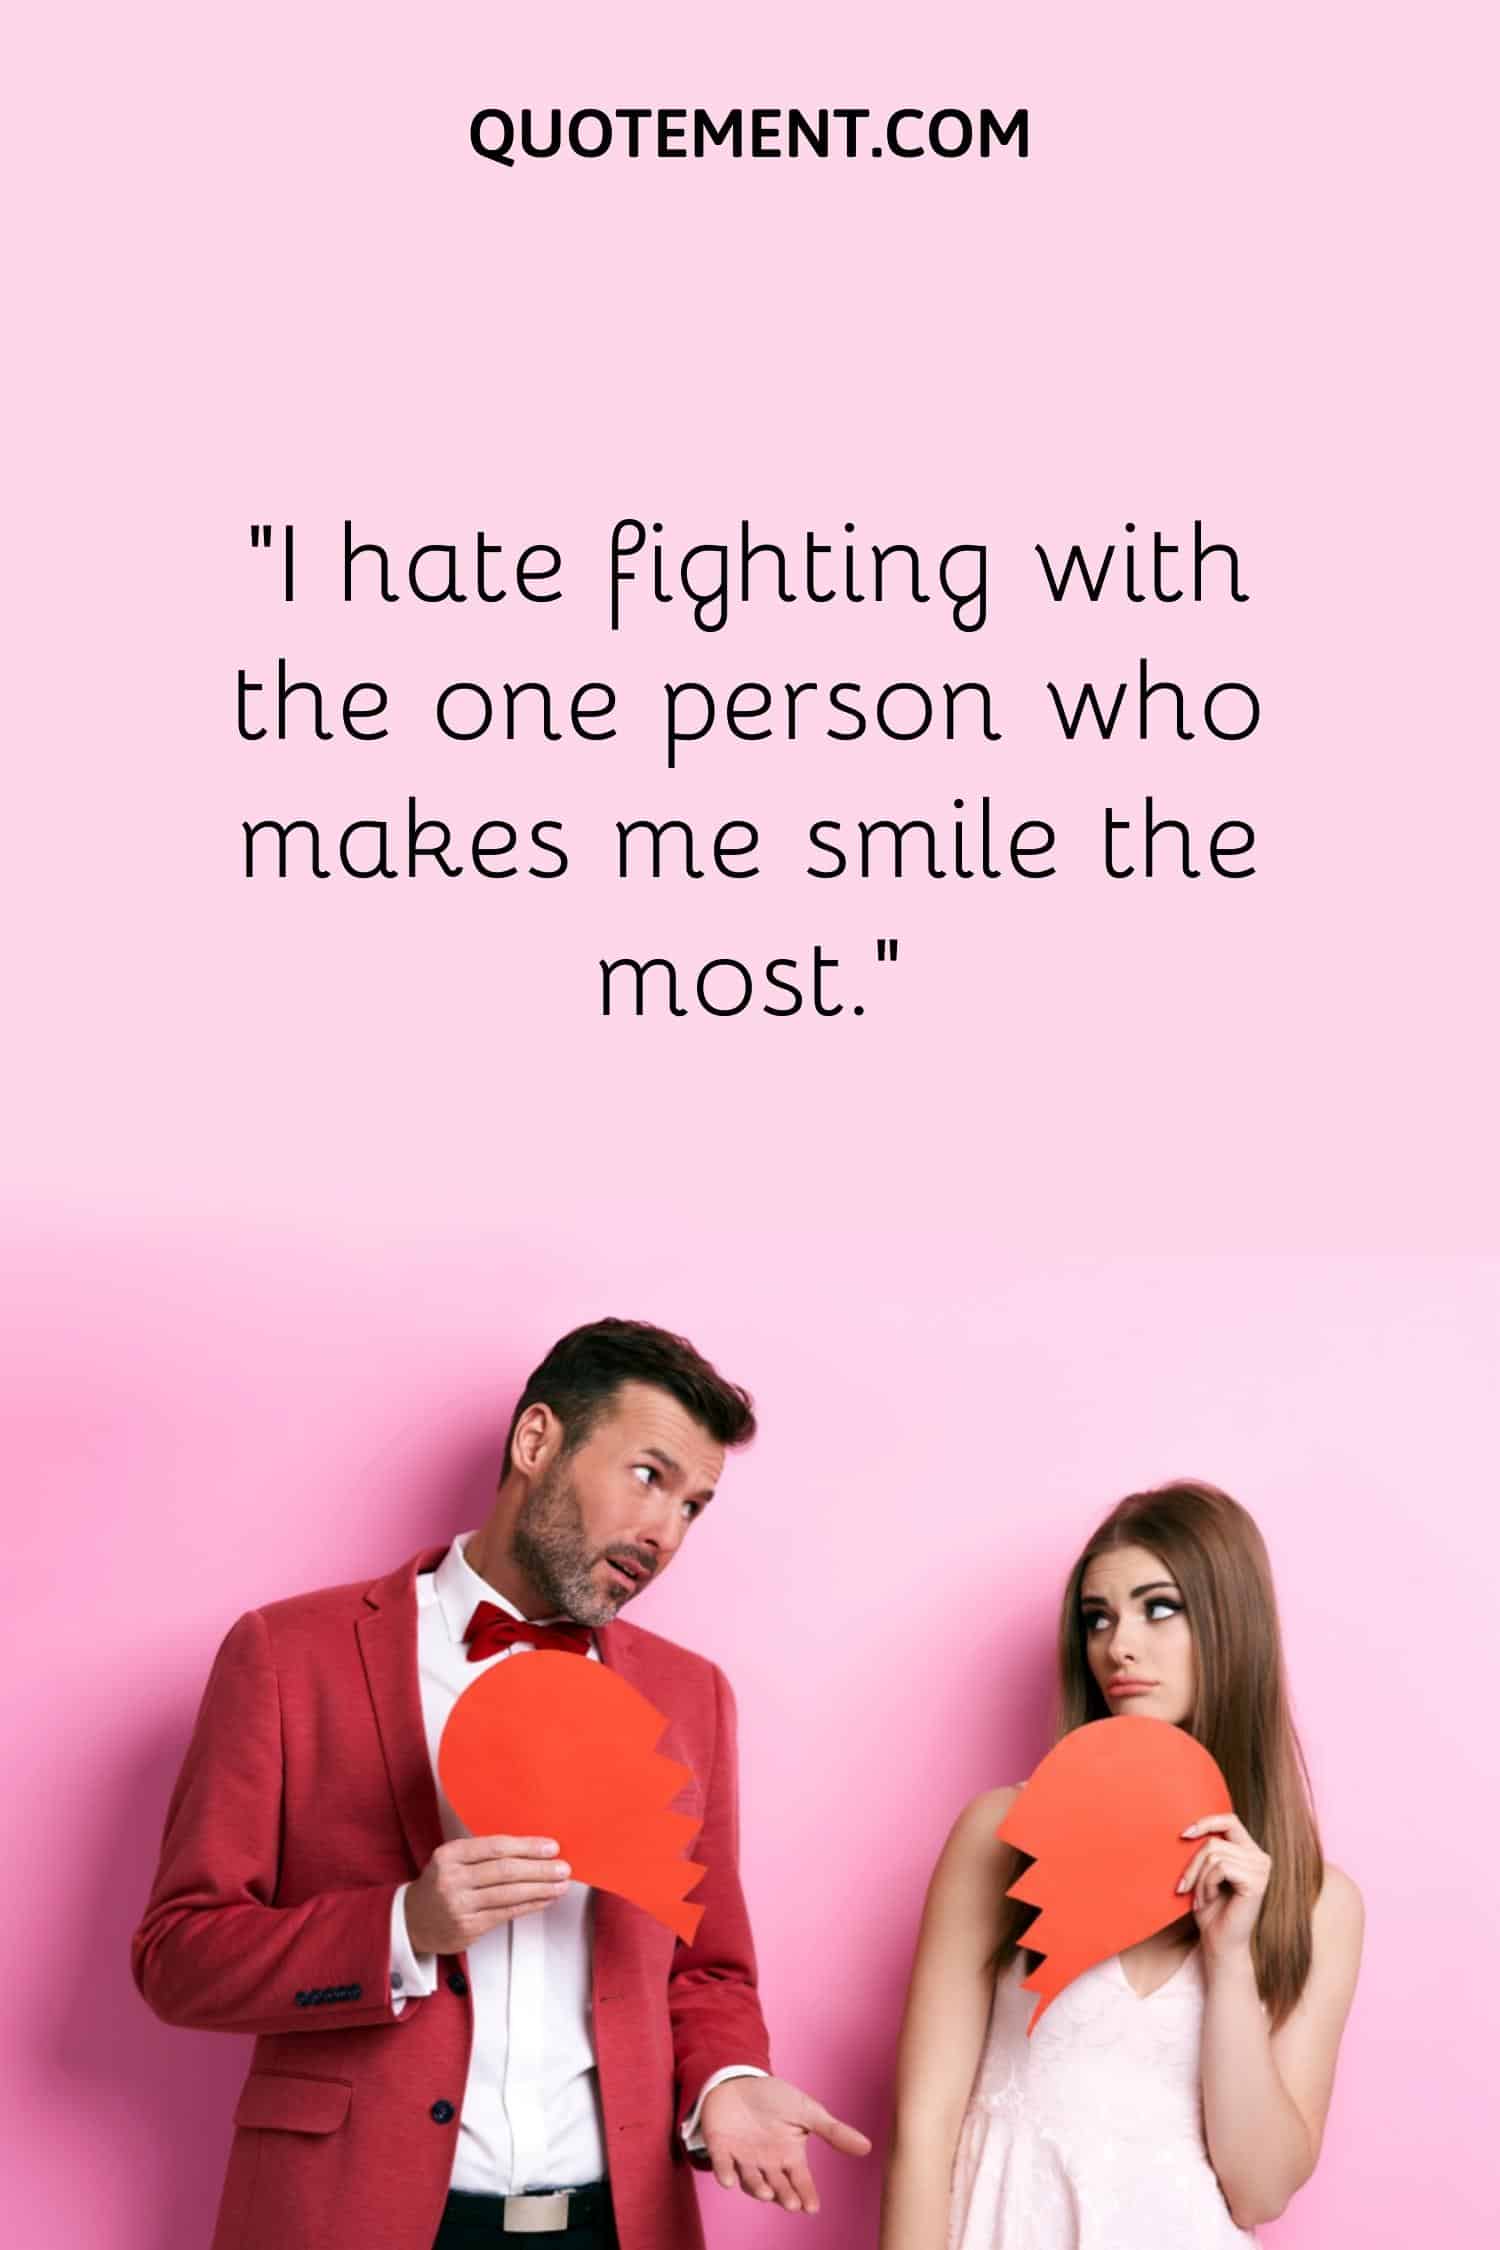 “I hate fighting with the one person who makes me smile the most.”